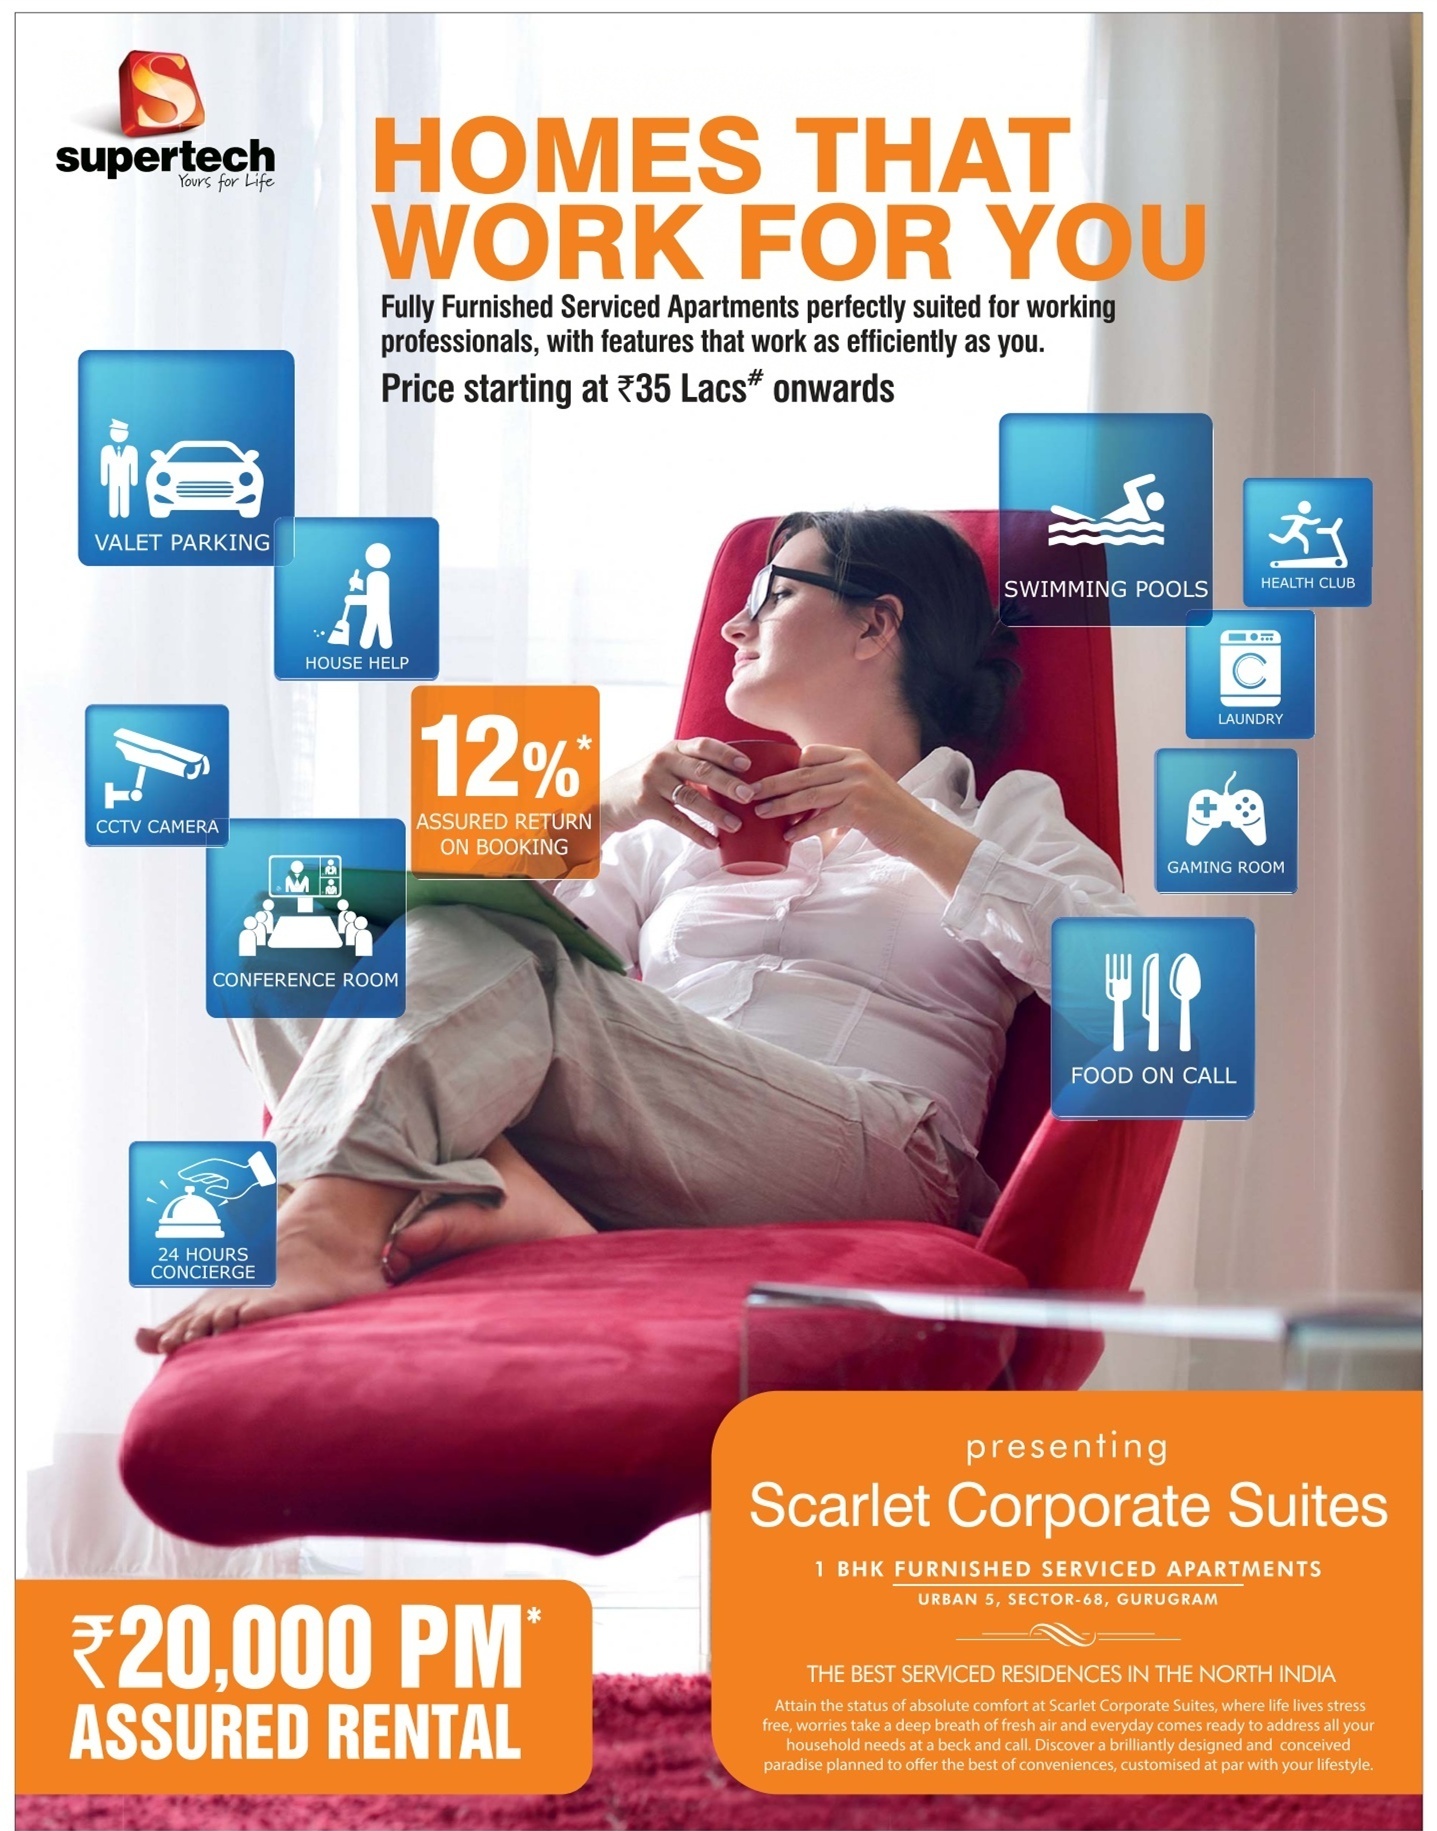 Supertech Scarlet Corporate Suites with 12% Assured Return